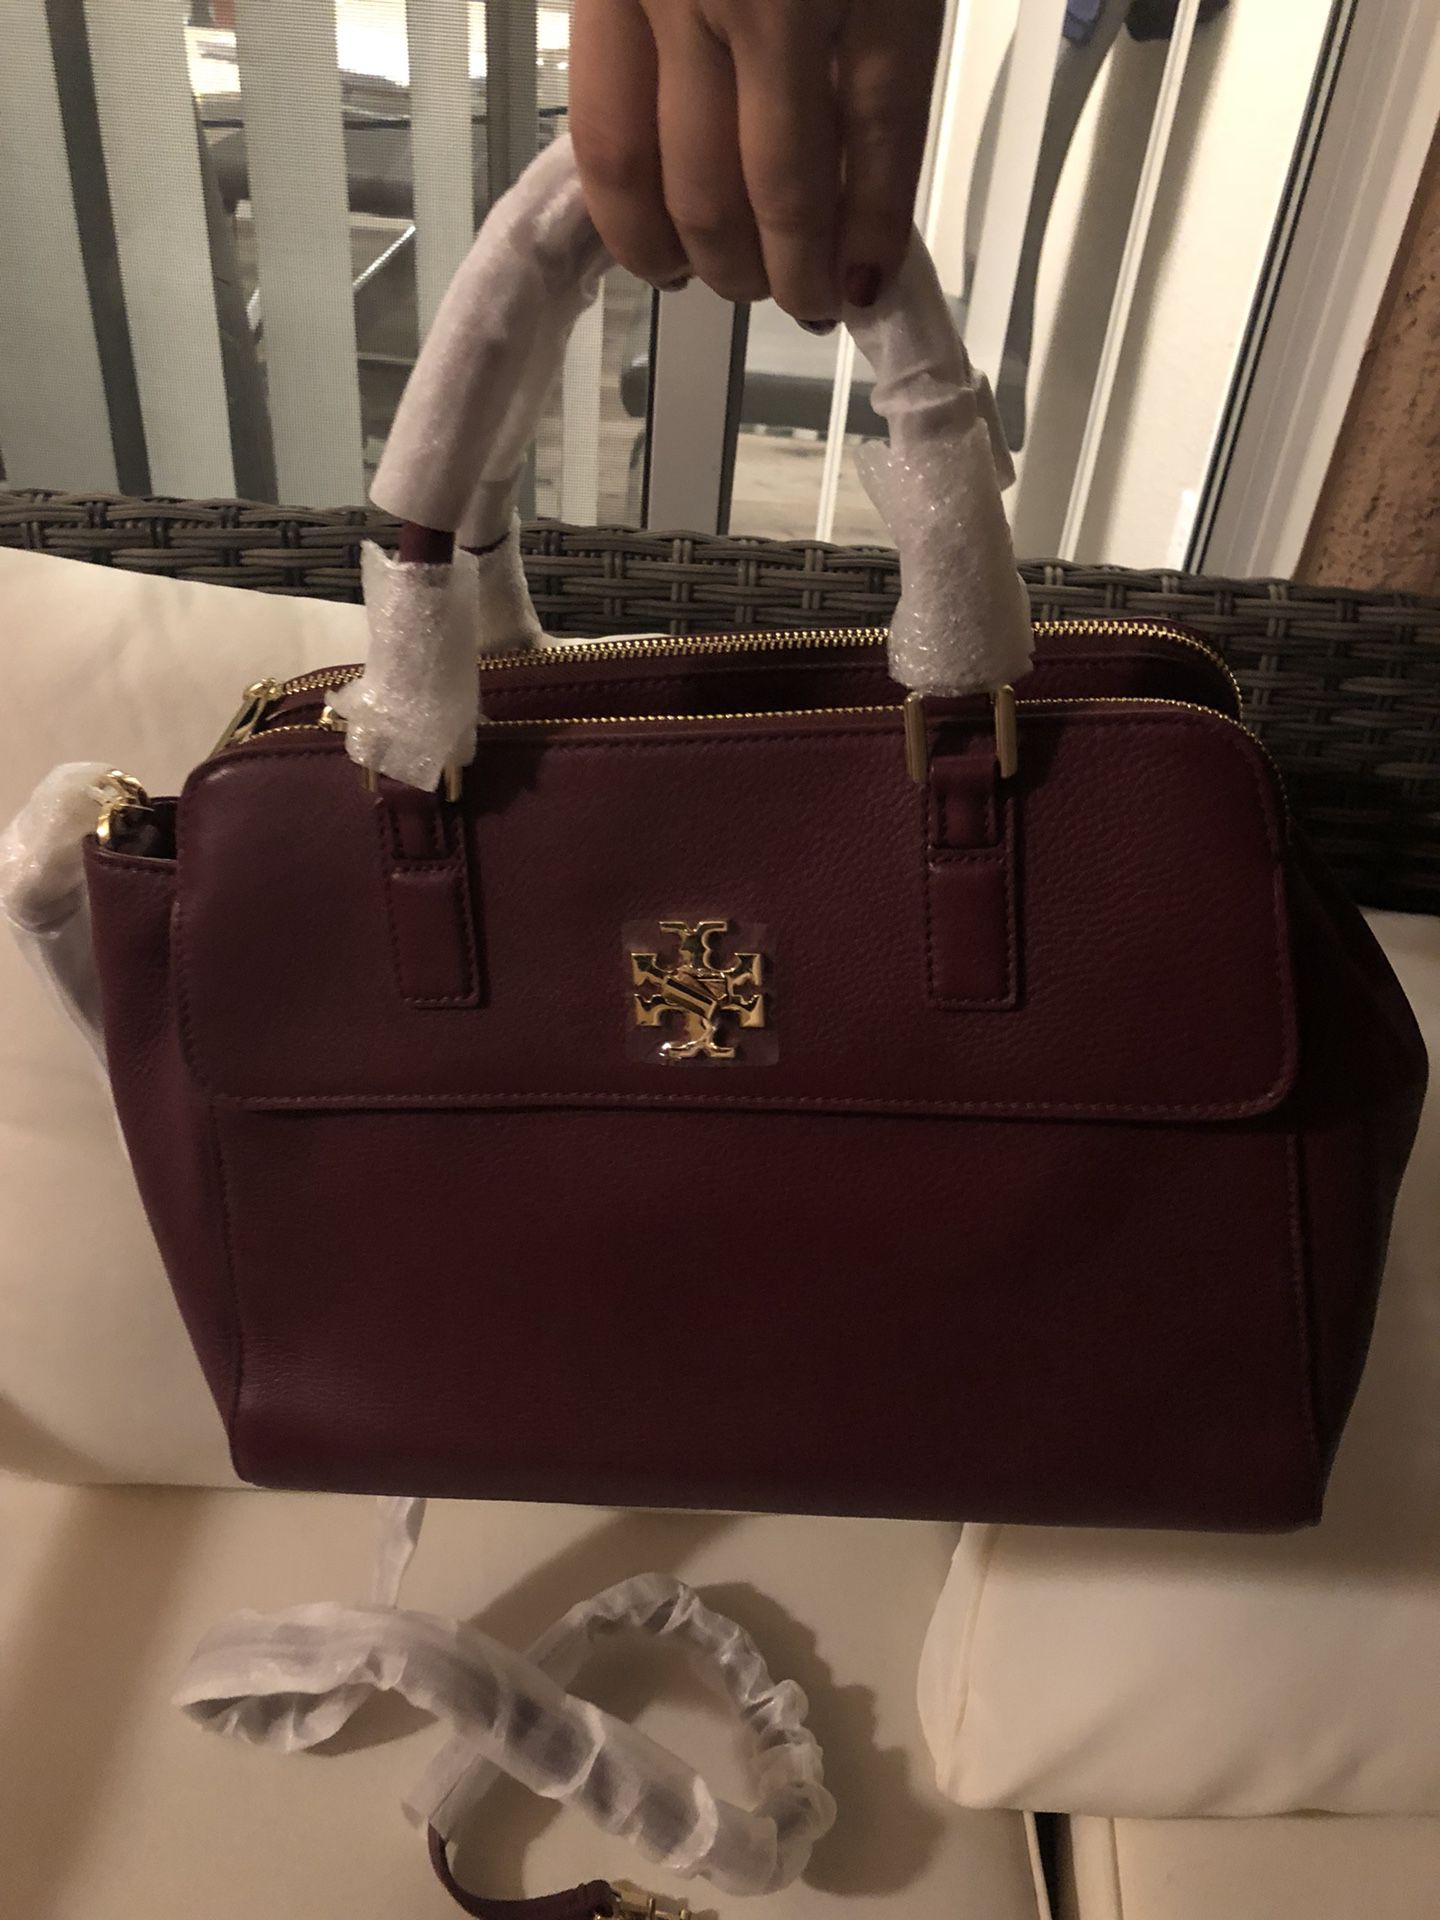 $449 Tory Burch Mercer dome bag,Style no. 31385. Never used, brand new with  original bag for Sale in Las Vegas, NV - OfferUp